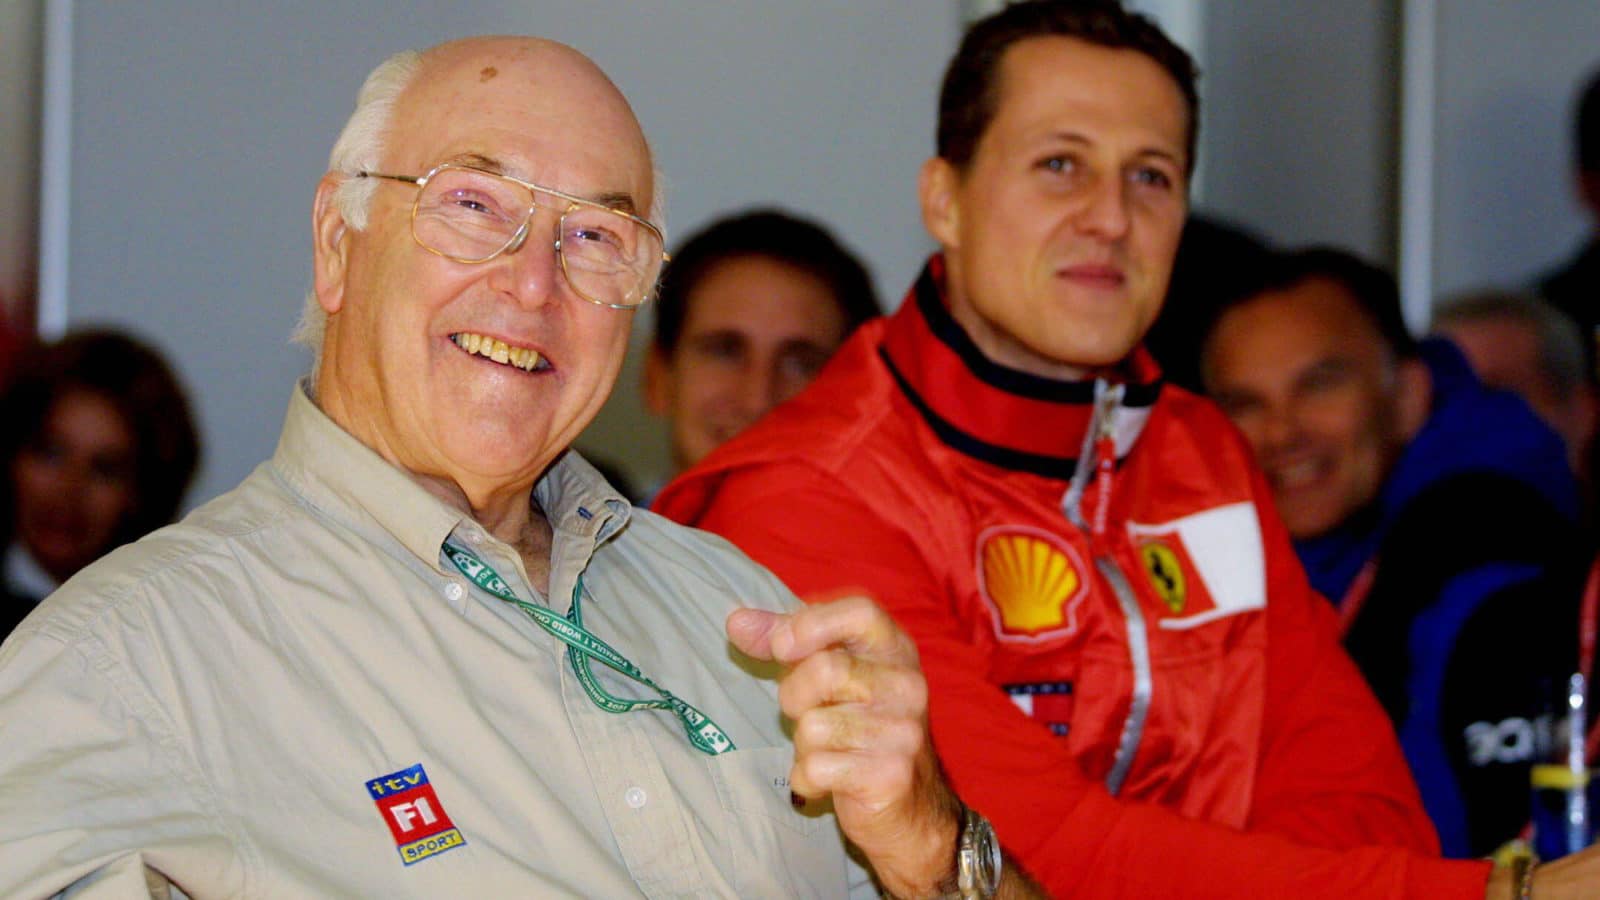 Michael Schumacher with Murray Walker at the 2001 US Grand Prix